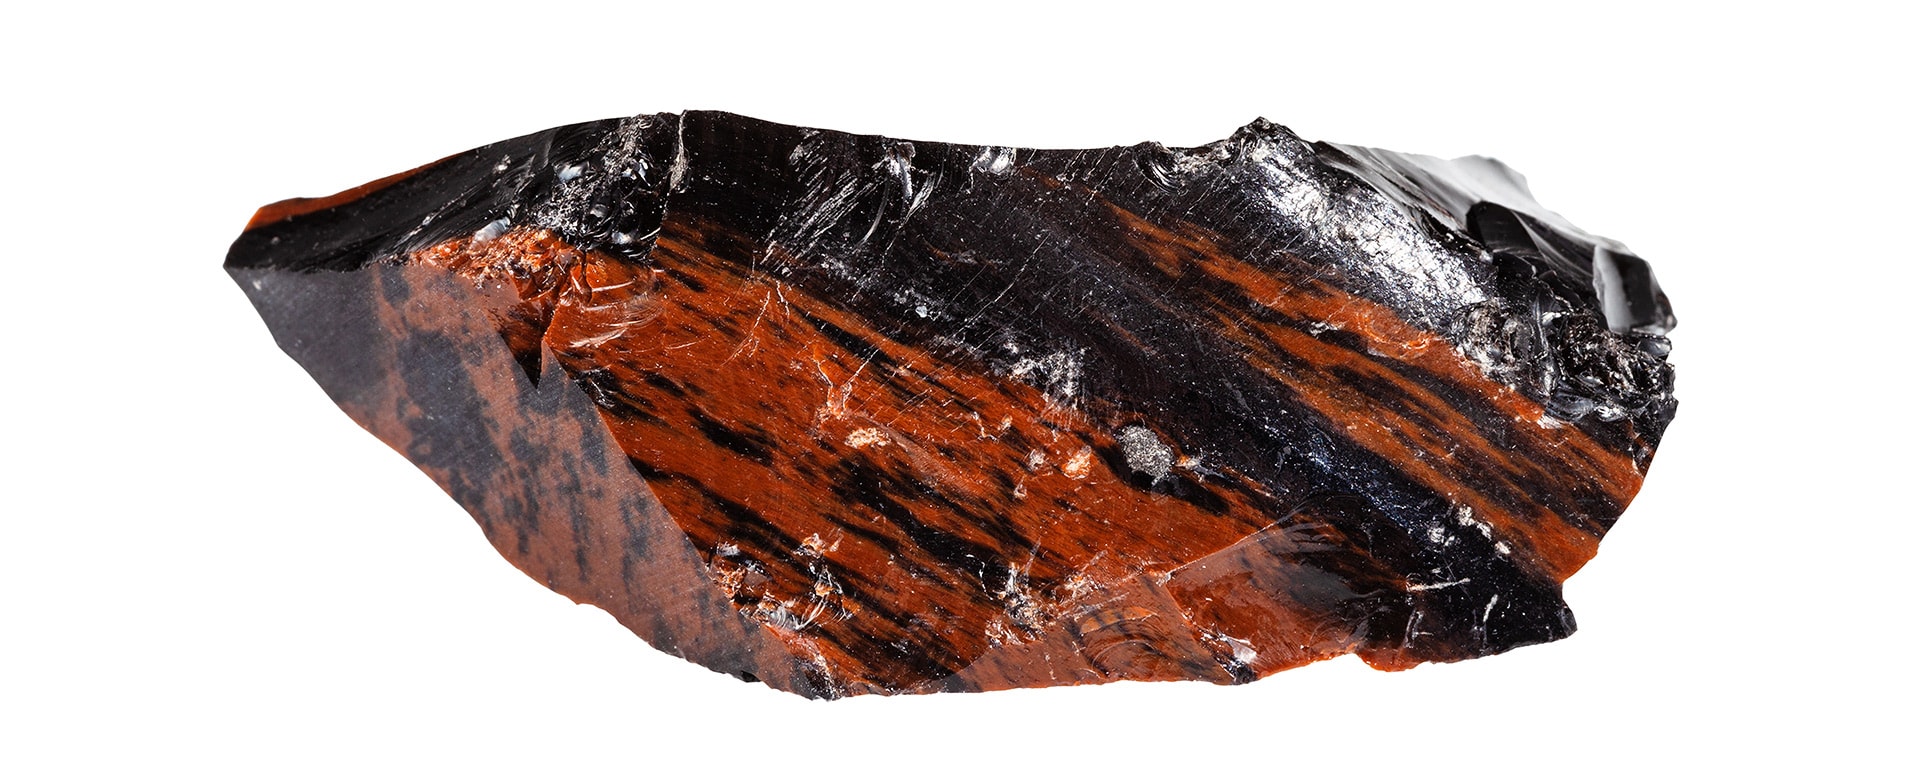 Mahogany Obsidian Meaning and Properties 1